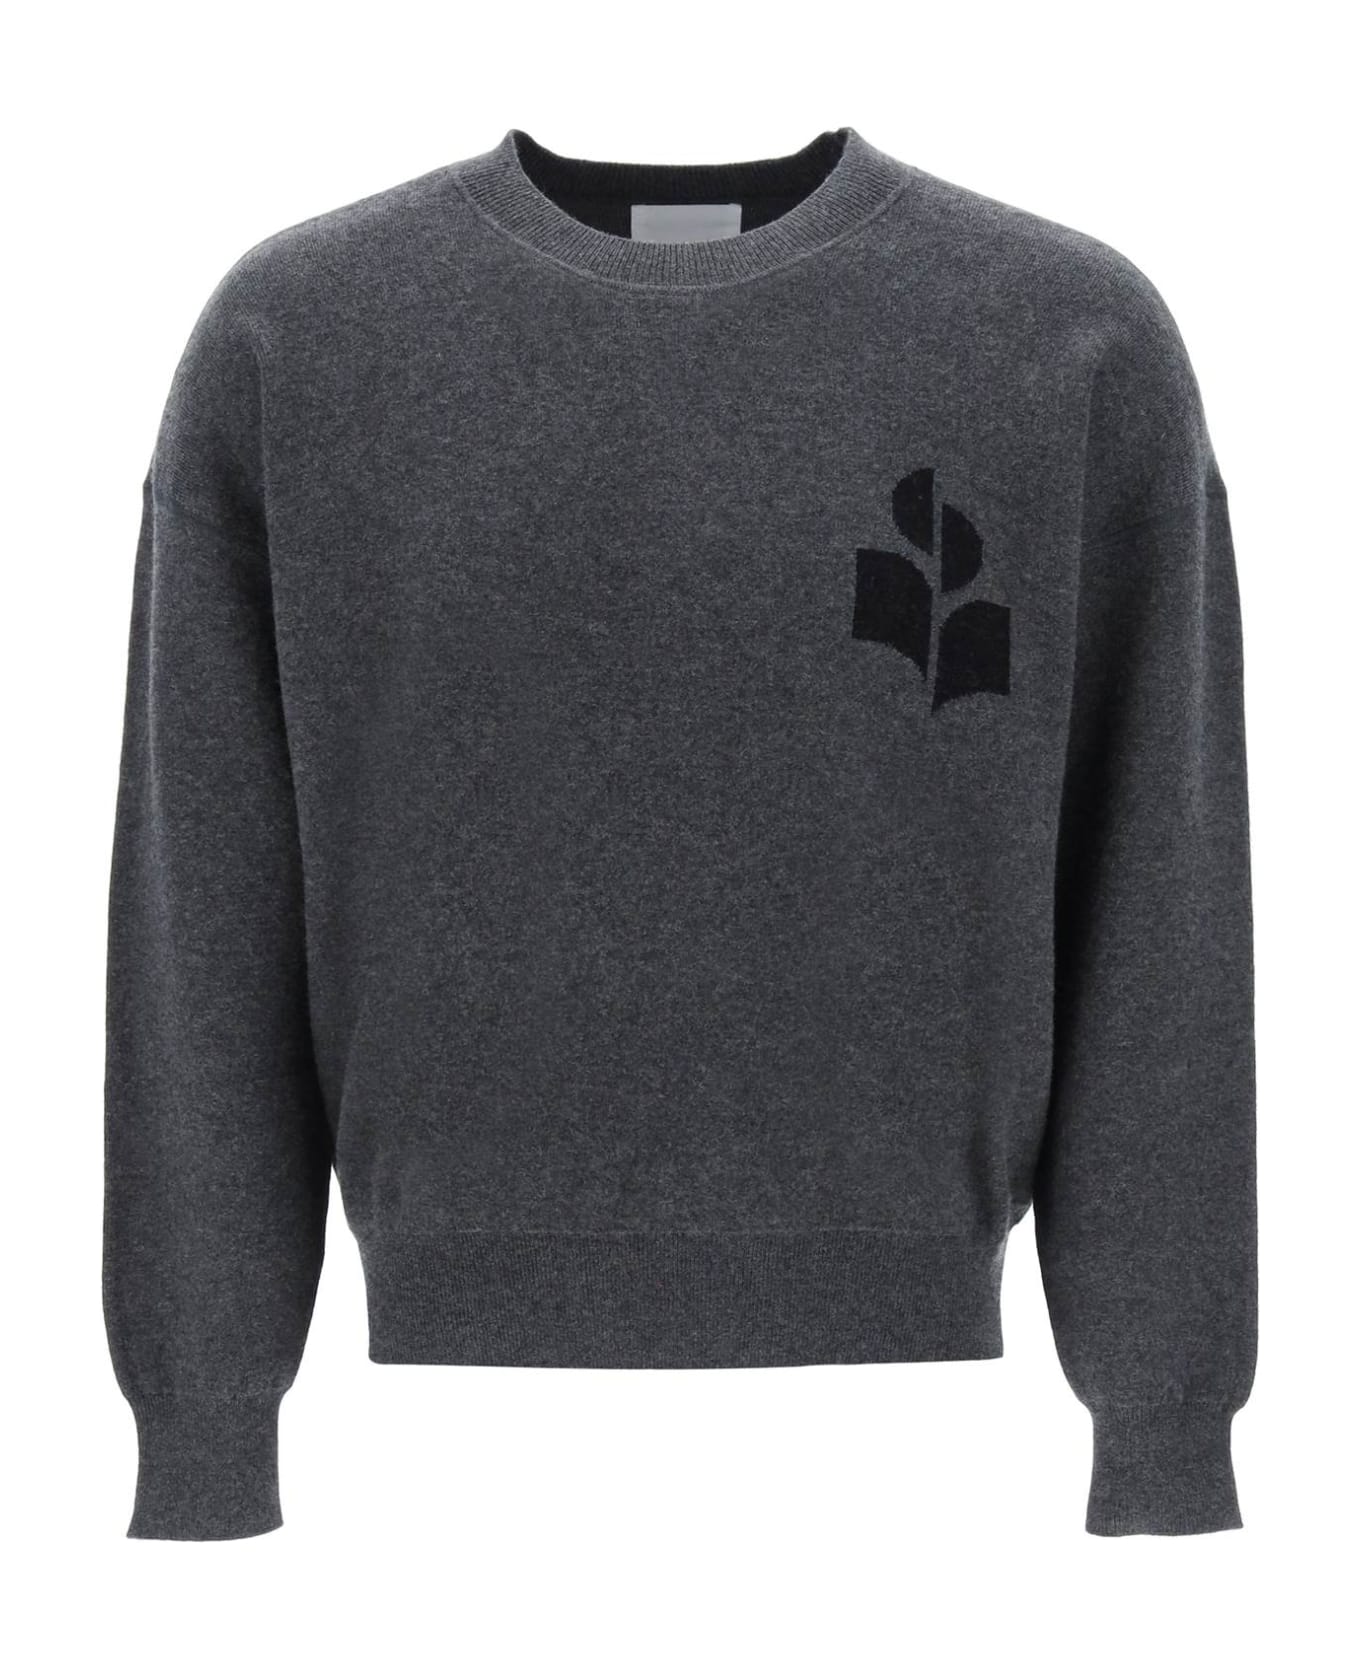 Isabel Marant Atley Pullover - An Anthracite